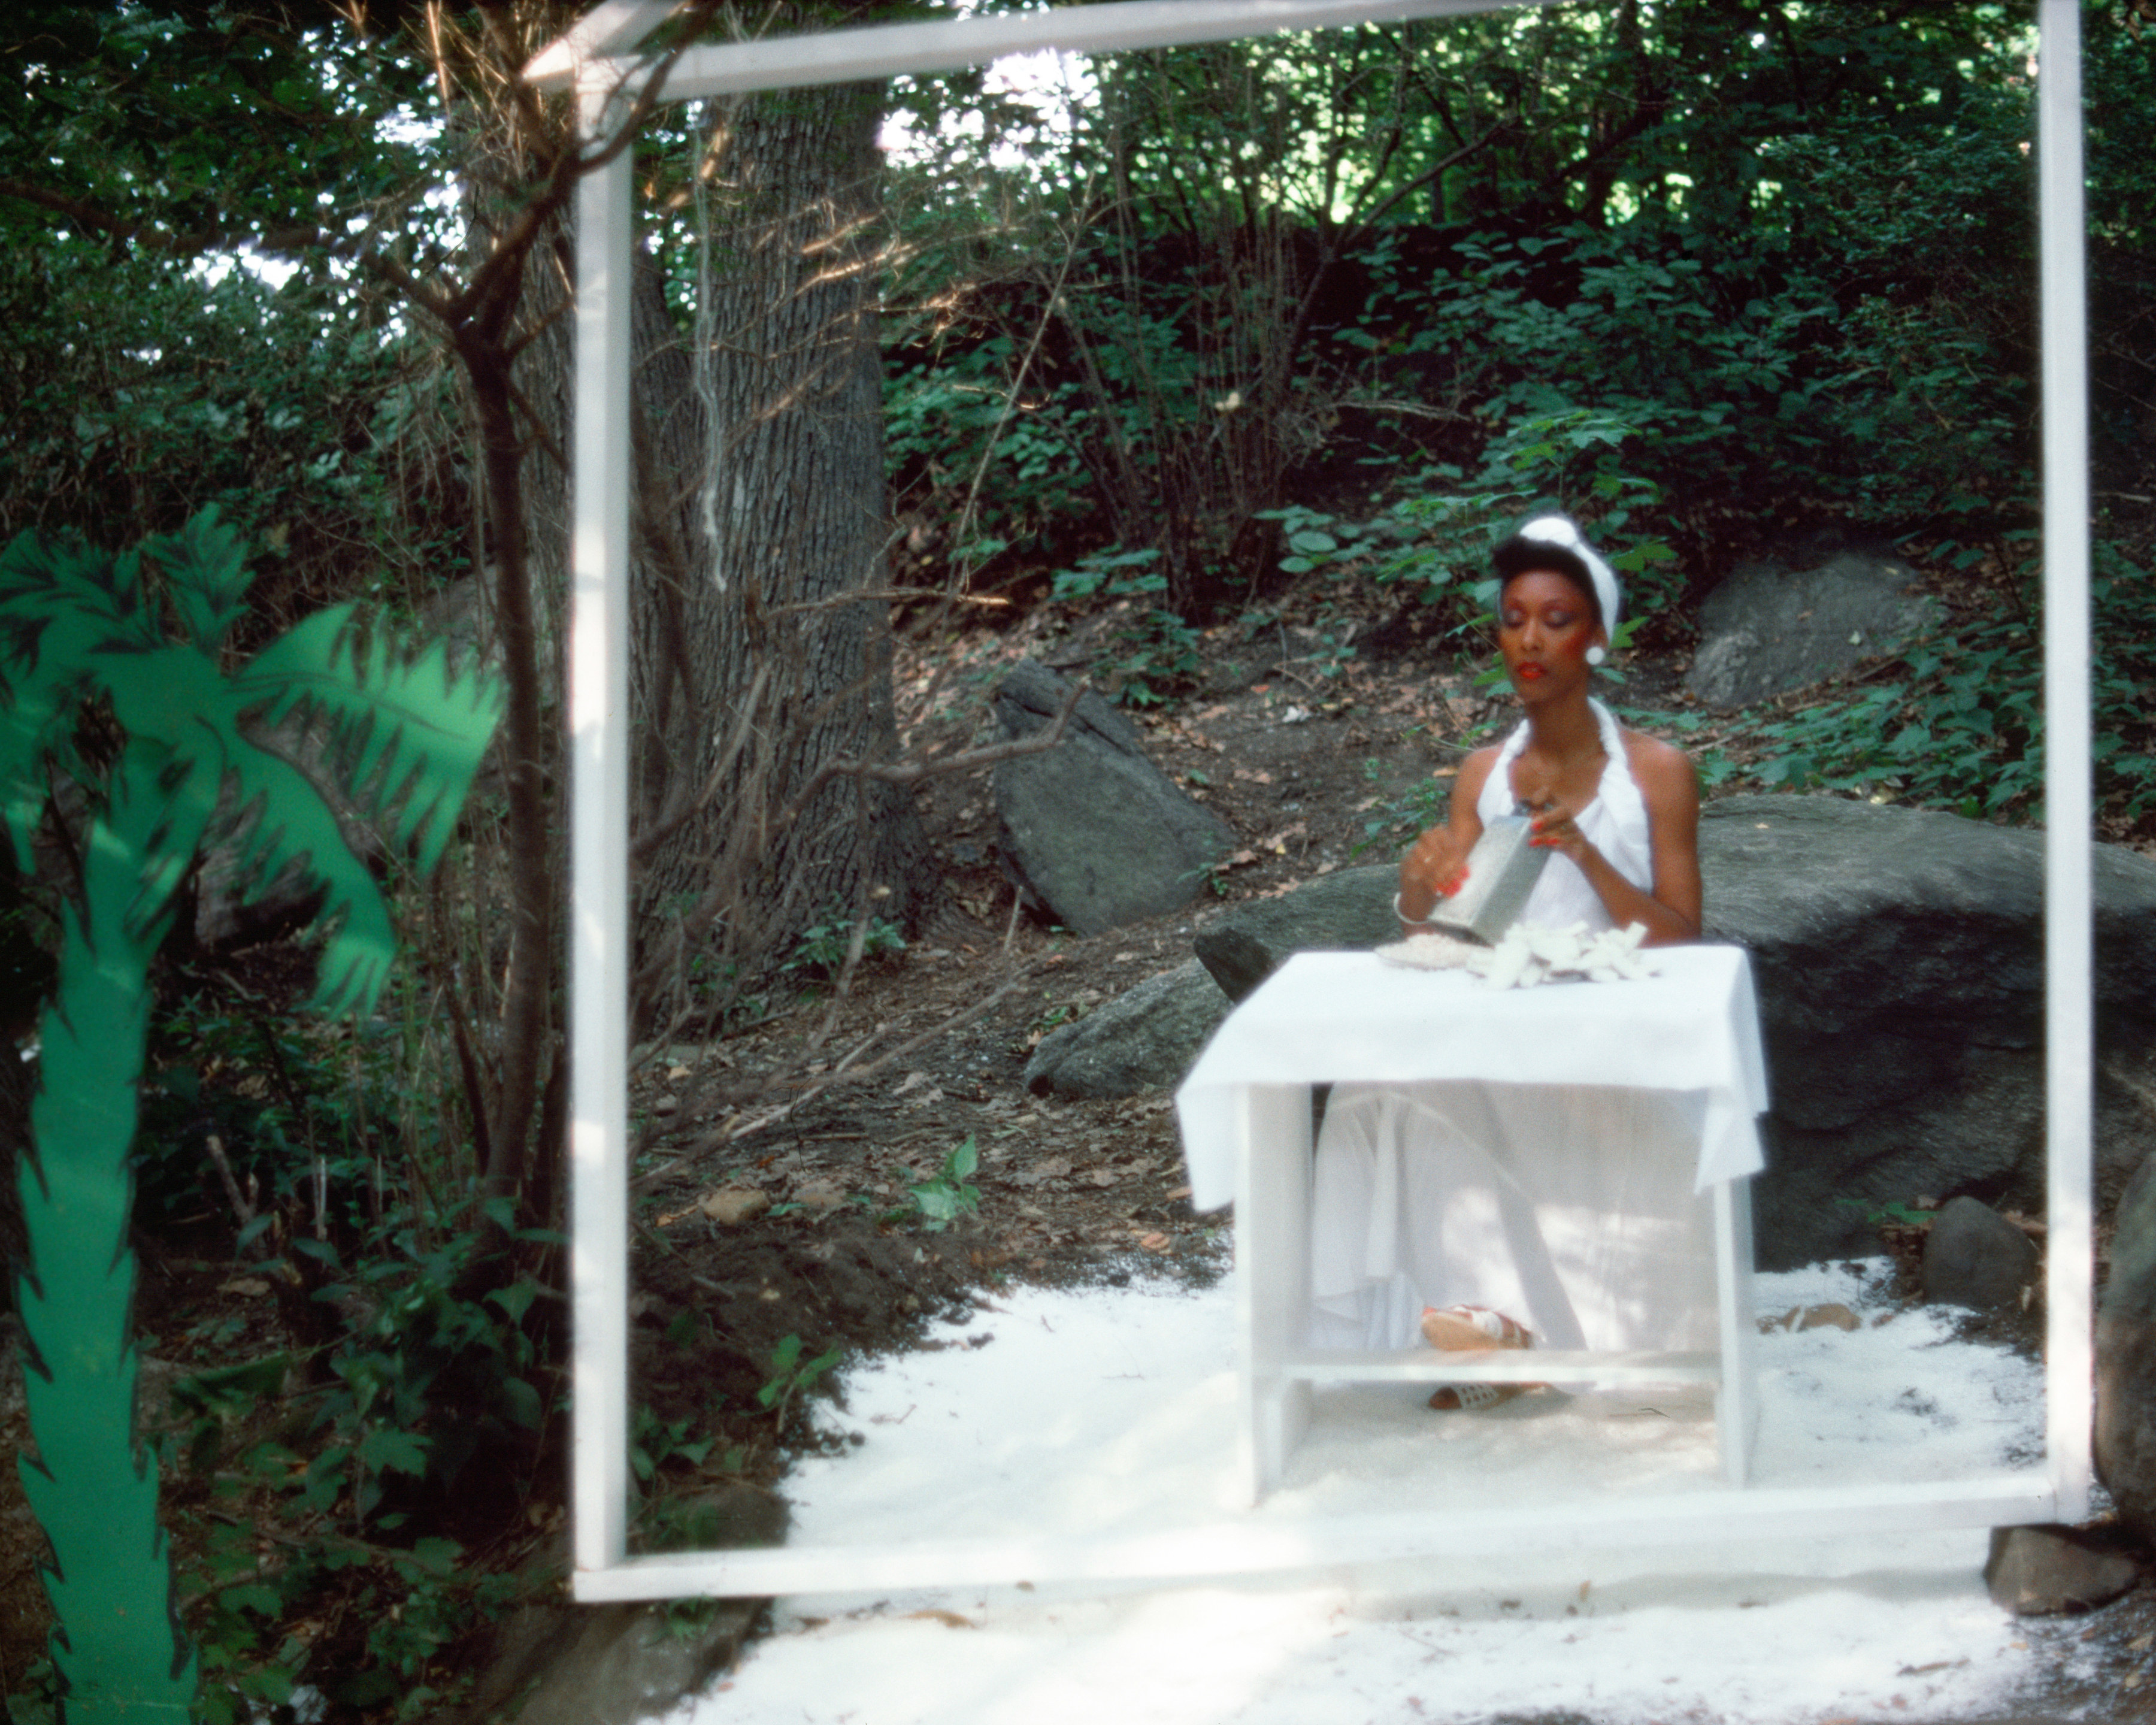 Rivers, First Draft: The Woman in White grates coconut in her kitchen, with the fir-palm tree outside, 1982/2015, Digital C-print from Kodachrome 35mm slides in 48 parts, 16h x 20w in (40.64h x 50.80w cm)